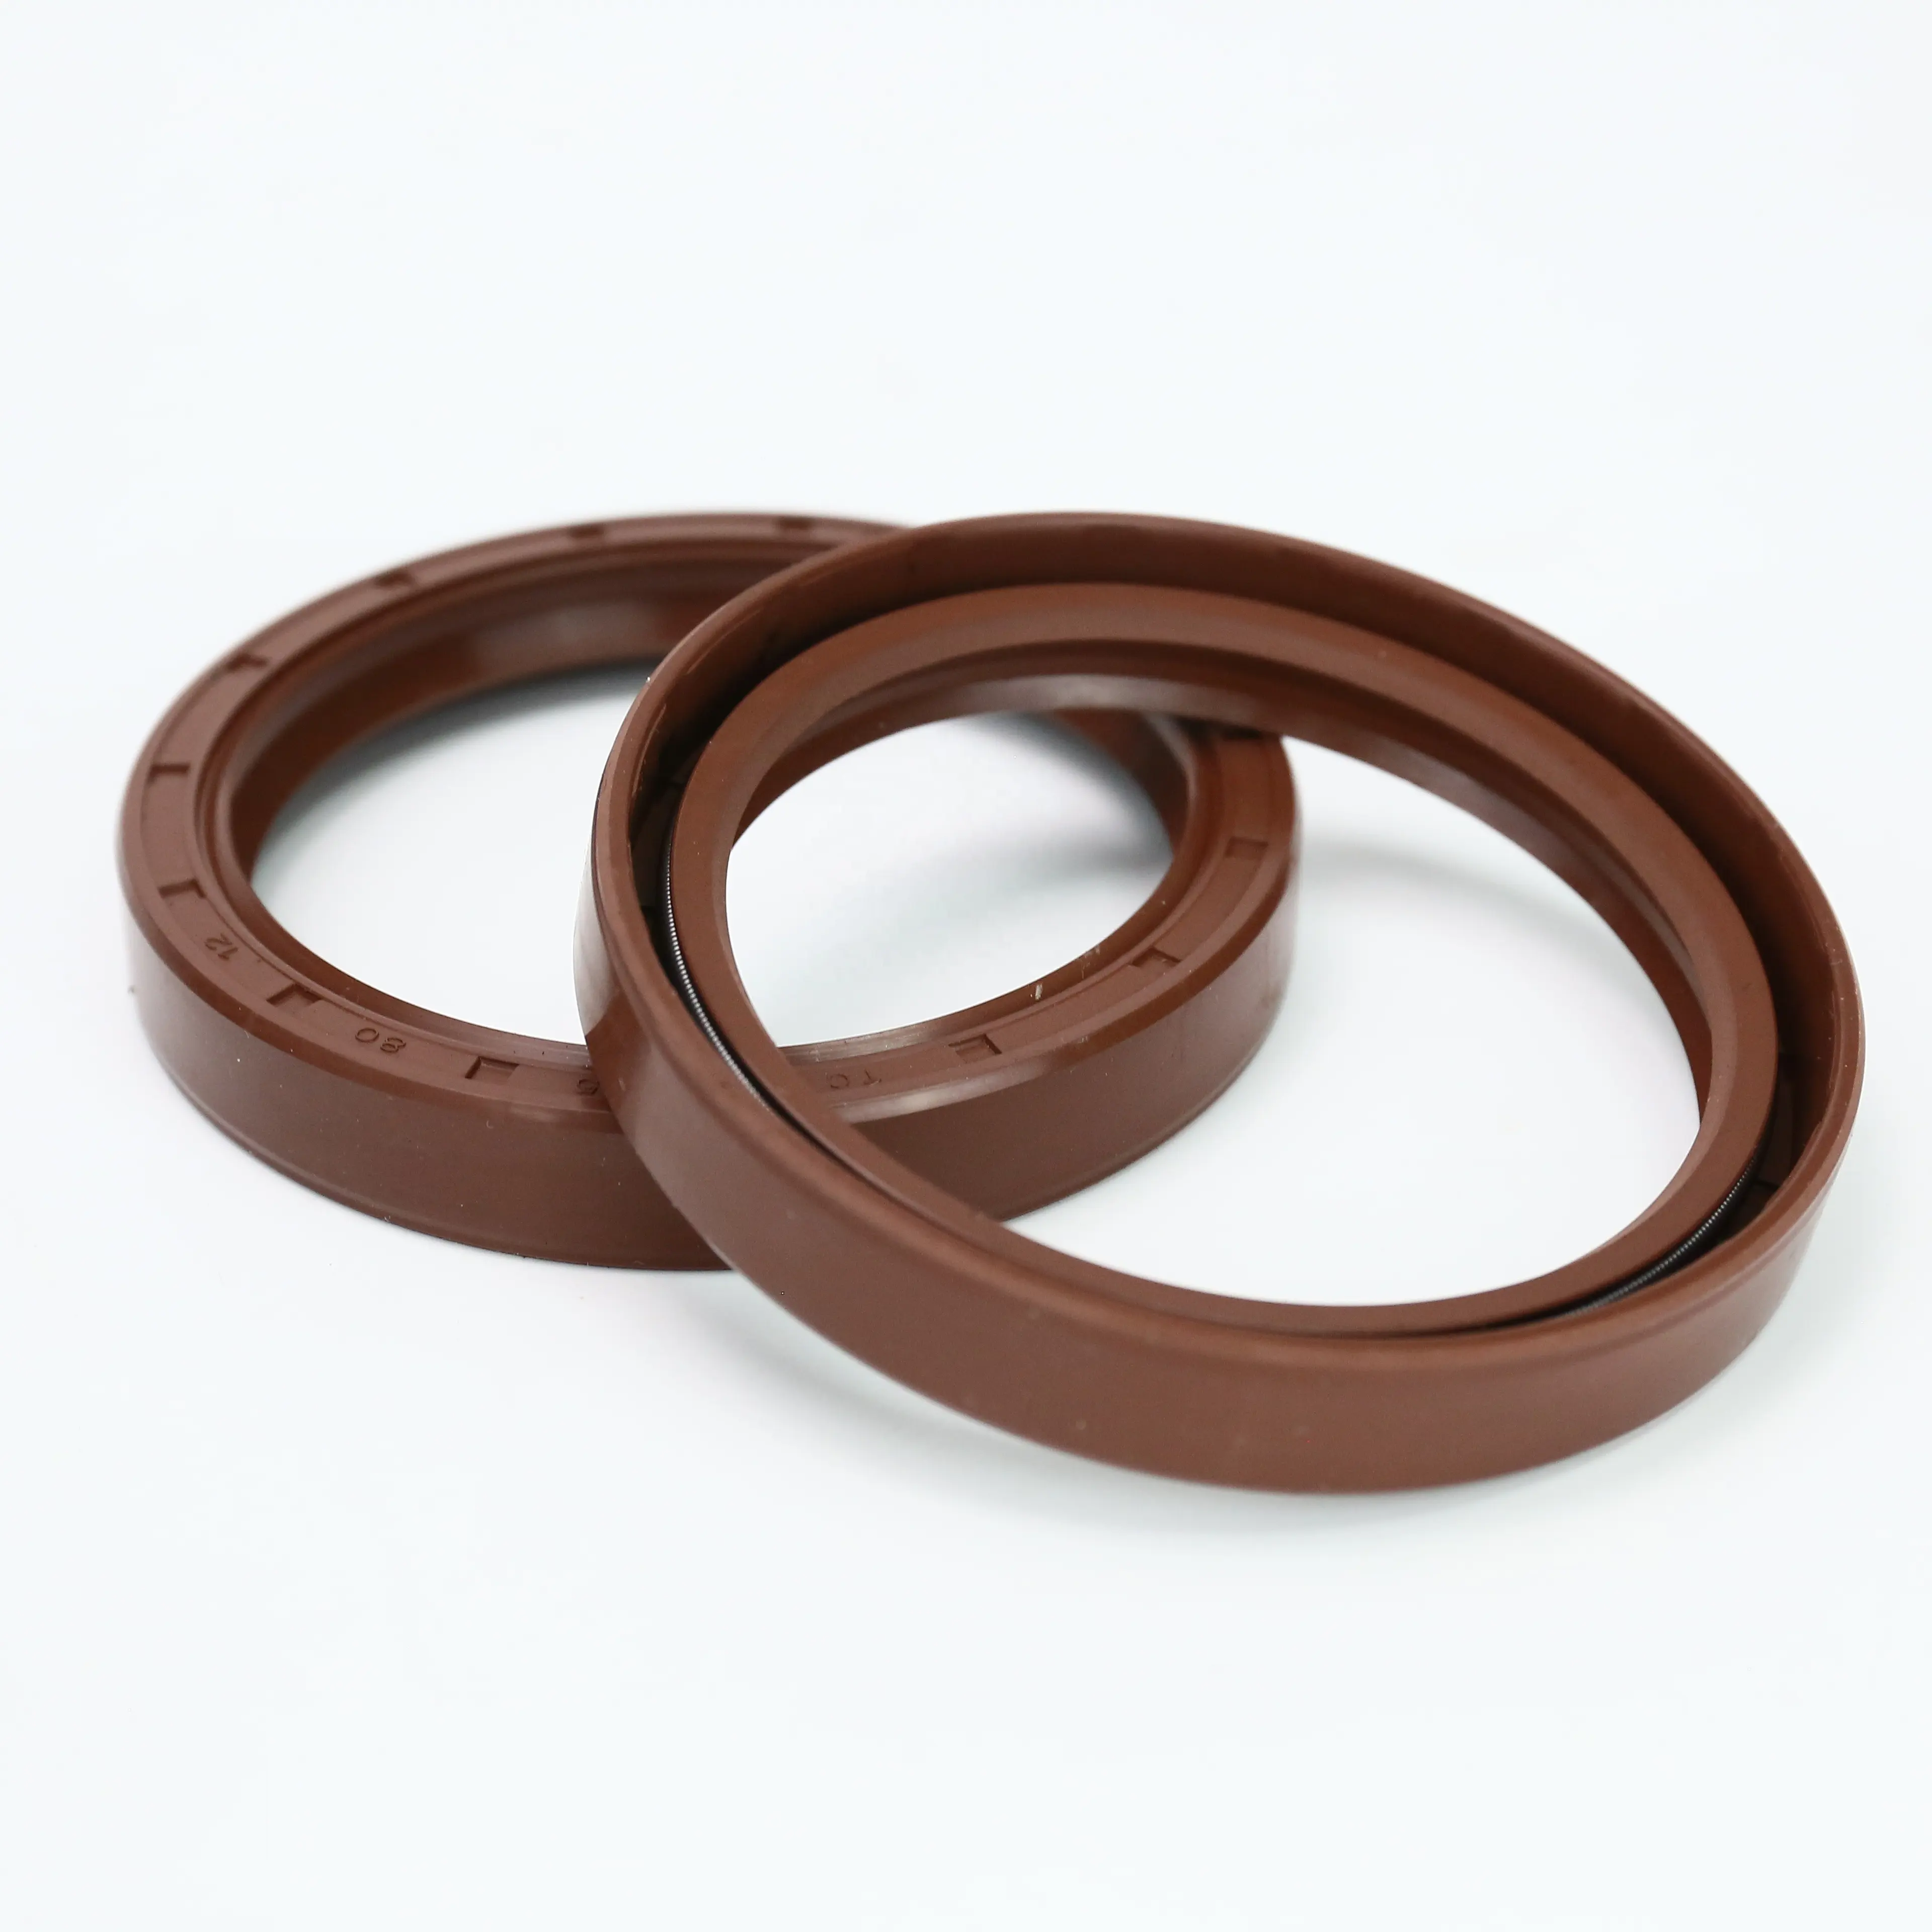 China manufactory SBT High Quality wholesale TC NBR oil seal TC FKM oil seal rubber oil seal